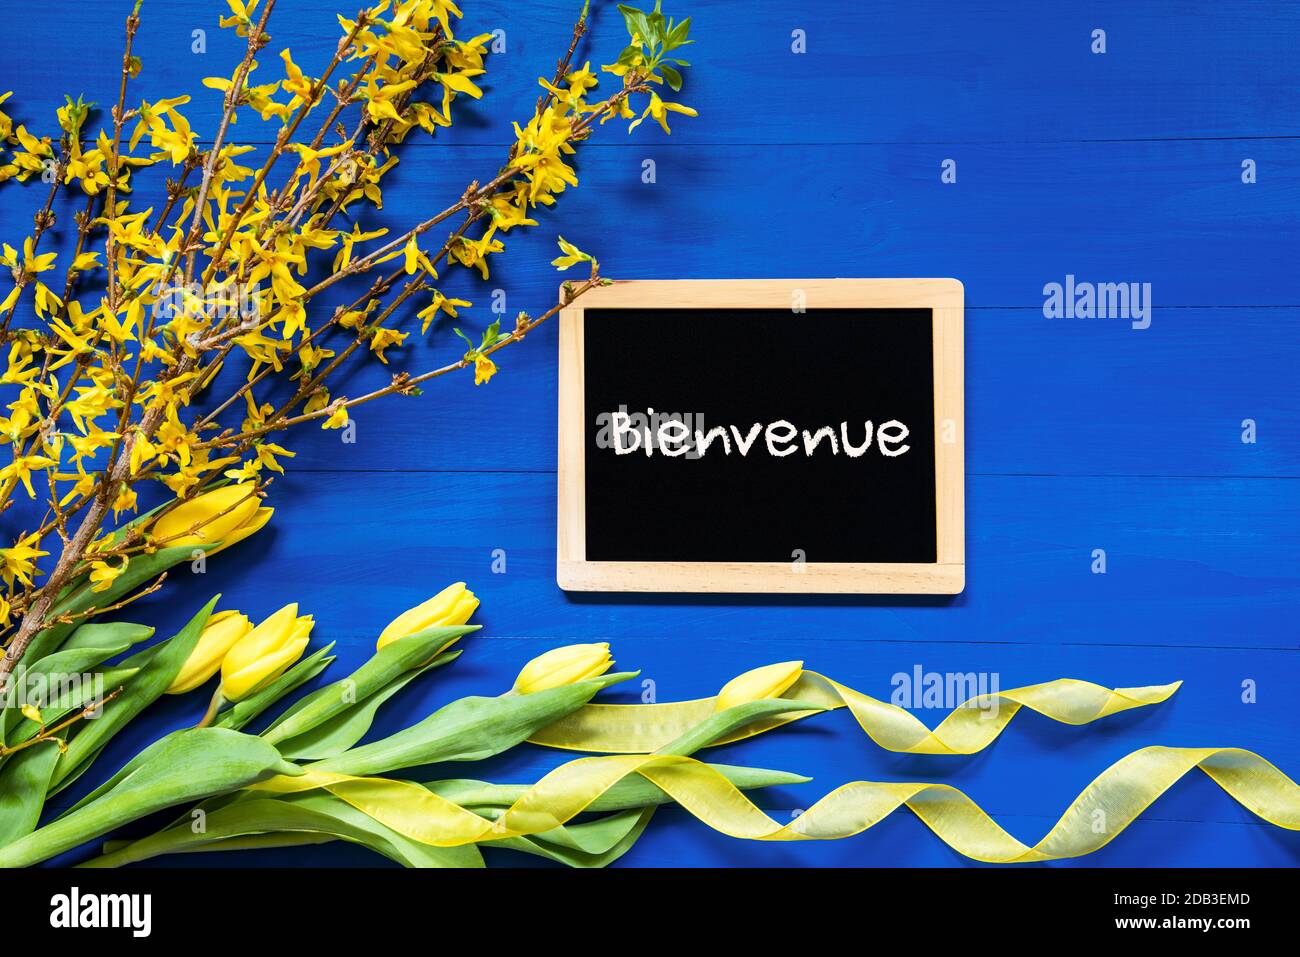 Blackboard With French Text Bienvenue Means Welcome. Yellow Spring Flowers Like Tulip And Branches. Festive Decoration With Ribbon. Blue Wooden Backgr Stock Photo